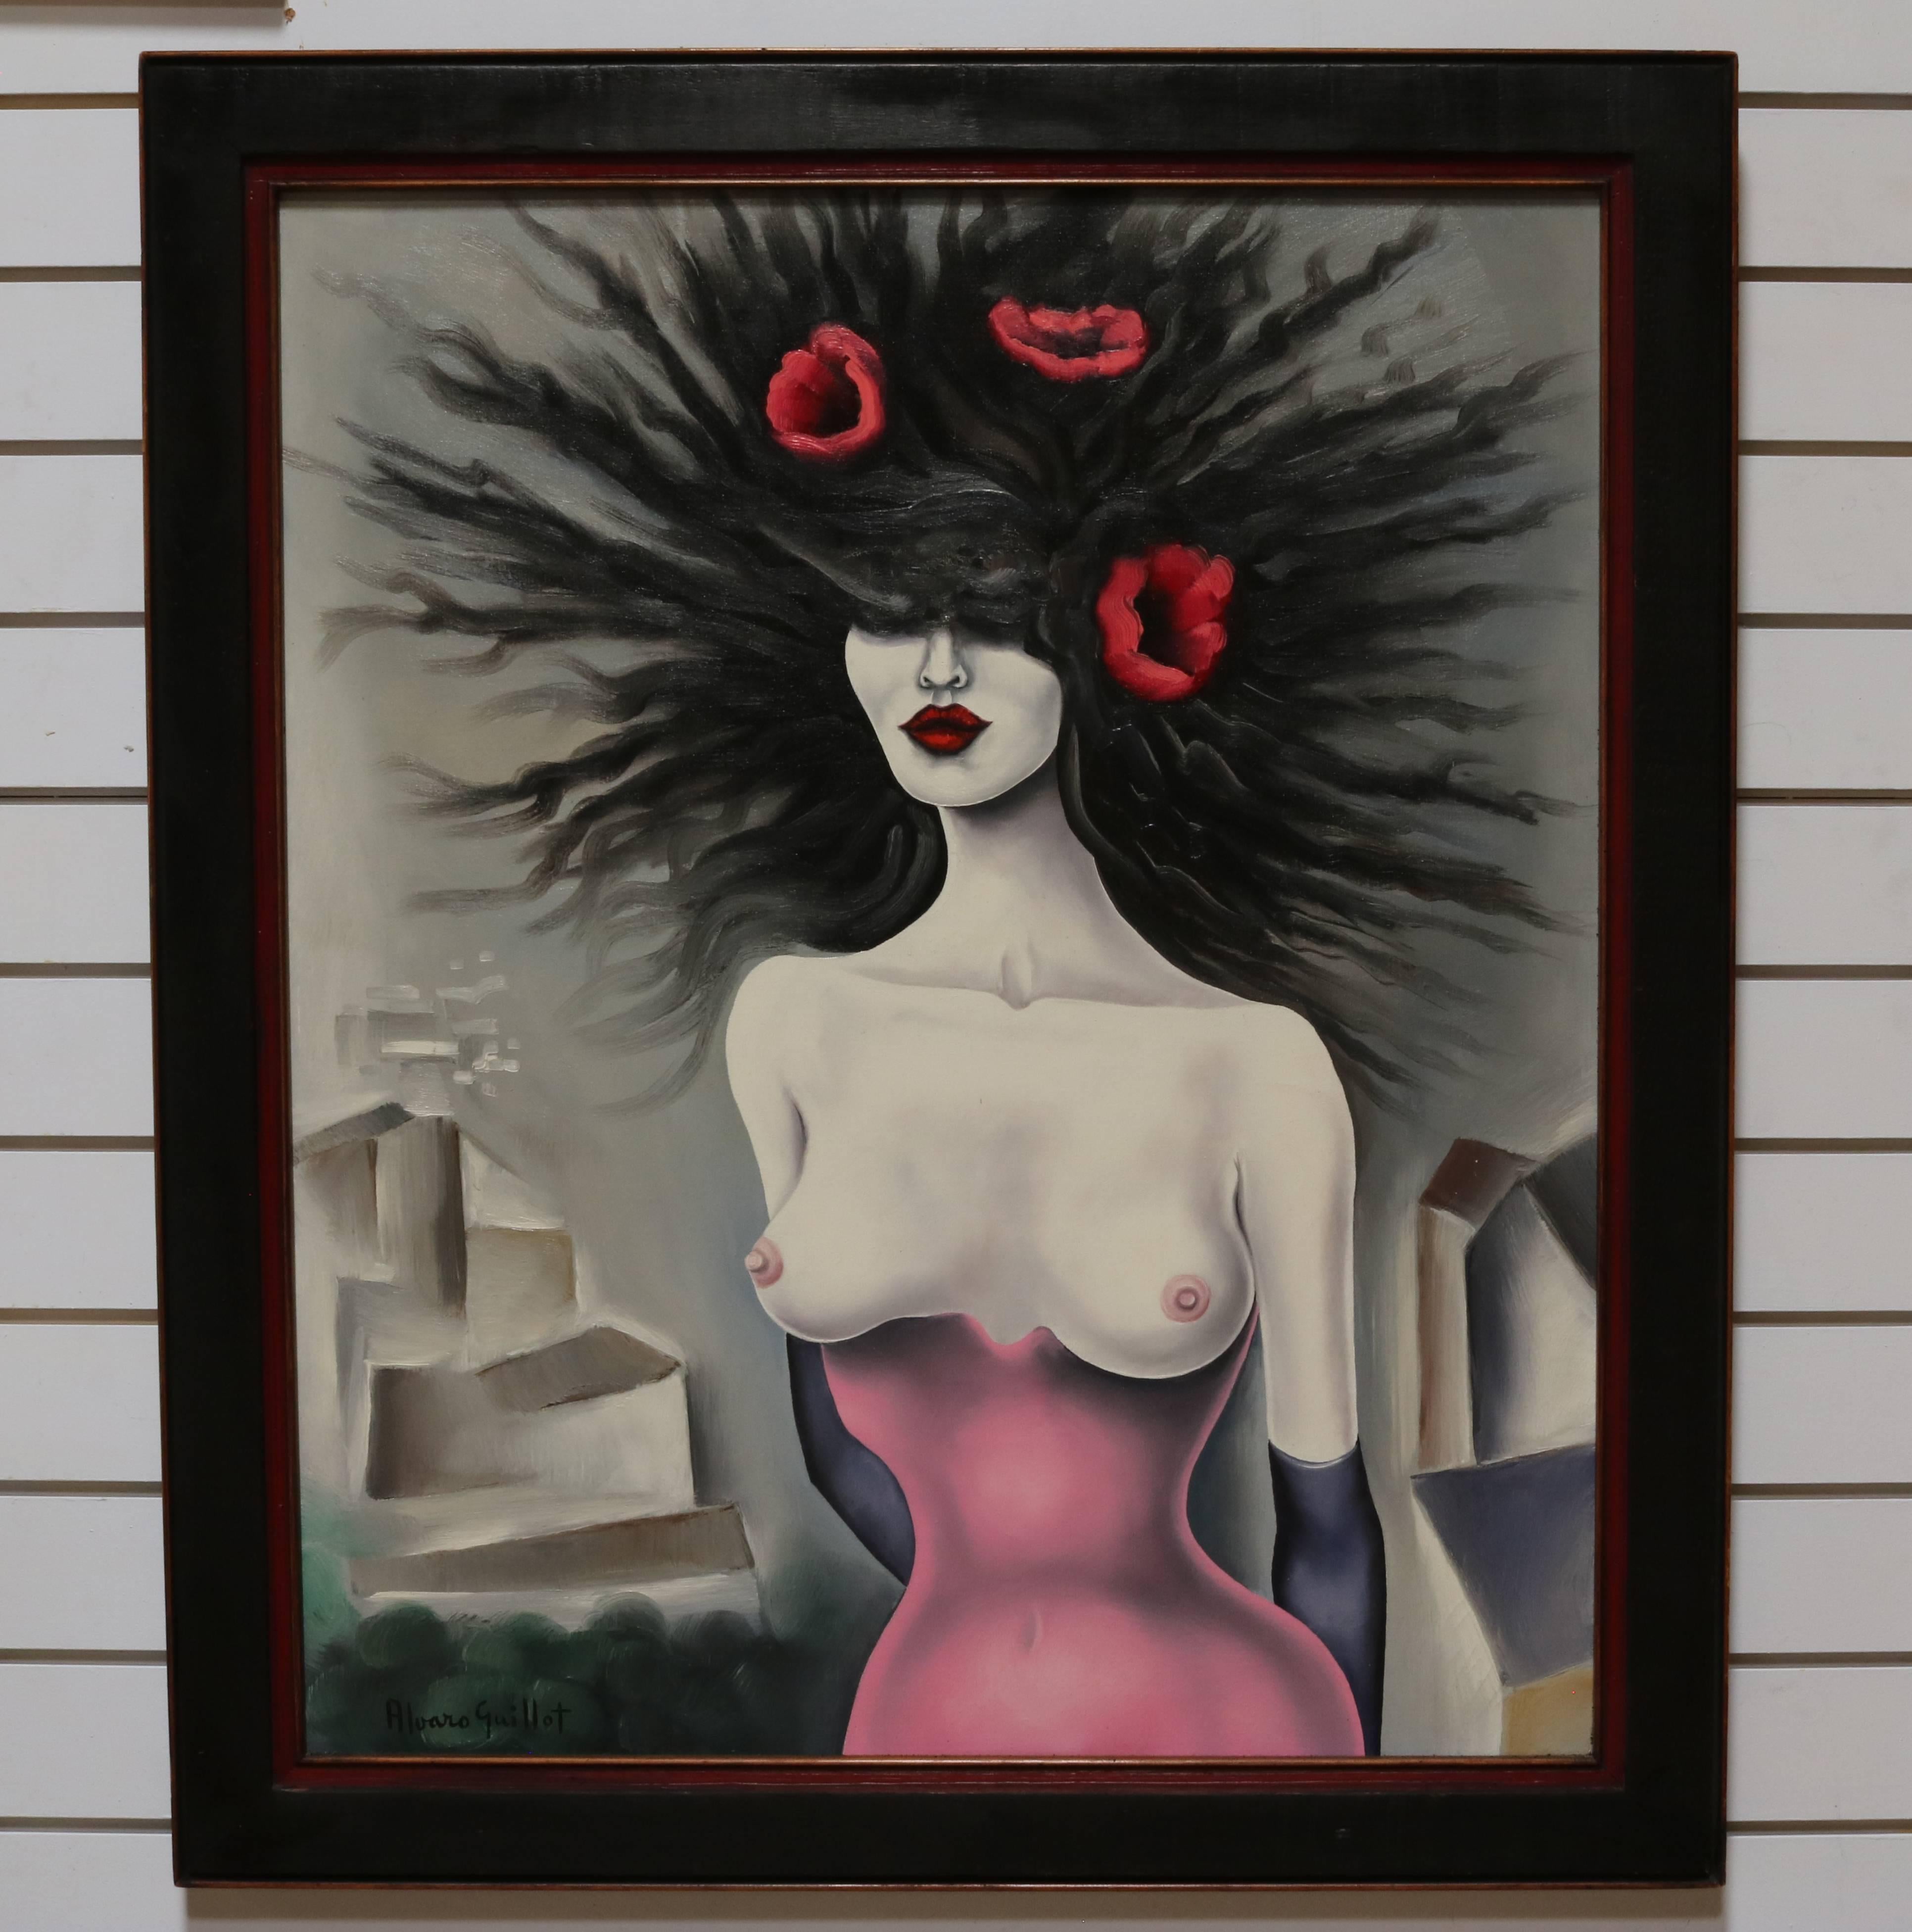 Oil painting on canvas title "At The Hollywood Party" and signed by Alvaro Guillot. A surrealistic, provocative mostly monochrome depiction, the painting features one of Guillot's signatures, the poppy.

Alvaro Guillot (1931–2010) was a